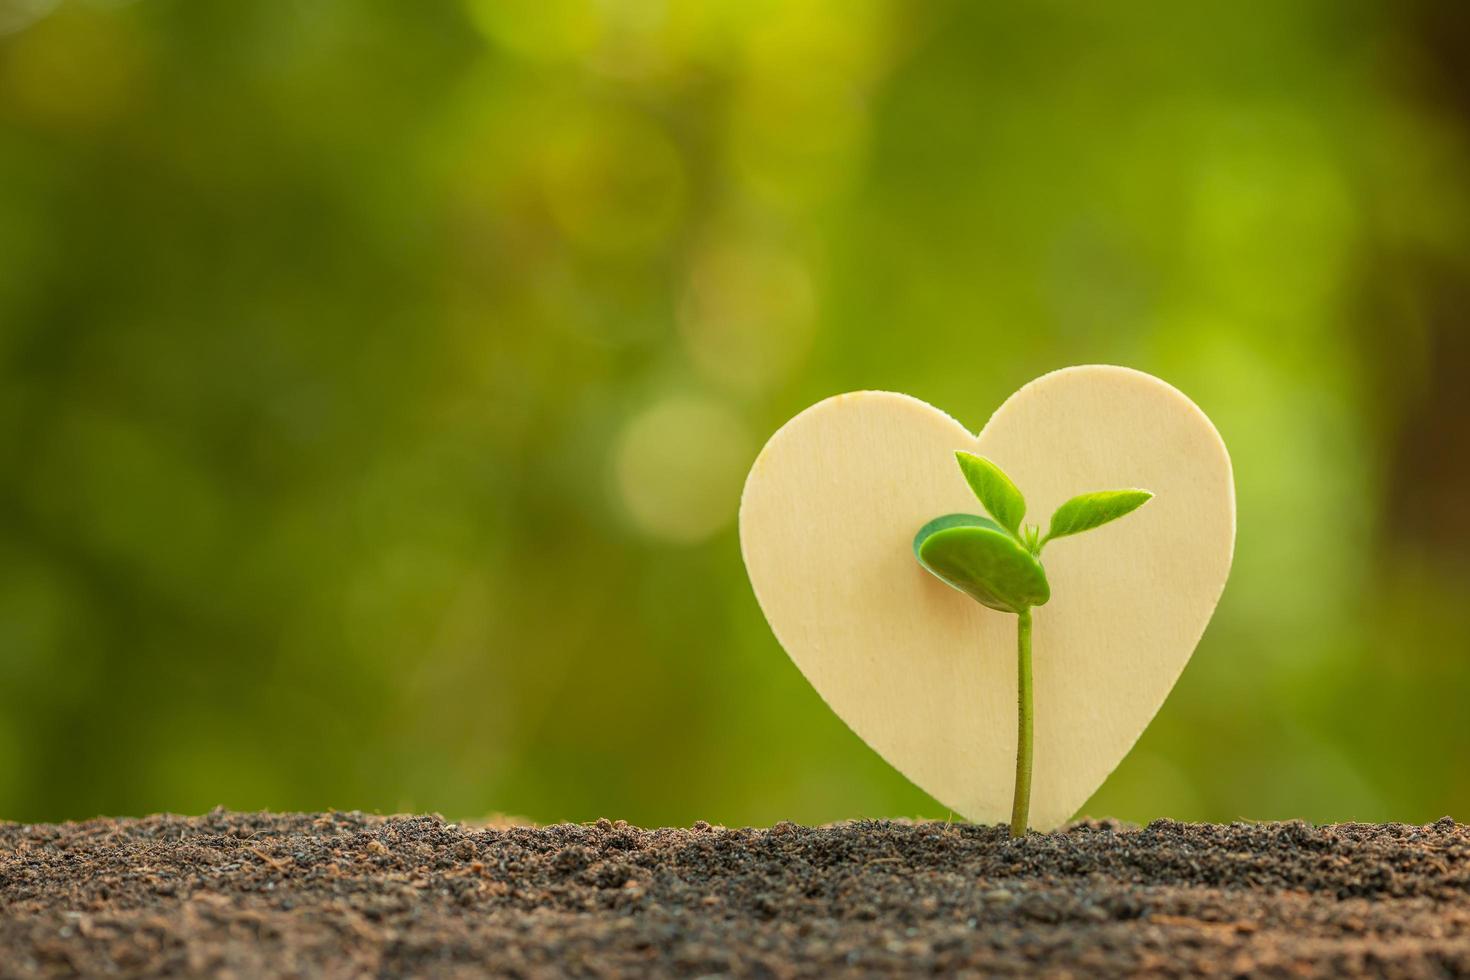 Green sprout growing in soil and wooden heart symbol on outdoor sunlight and green blur background. Love tree, Save world, or growing and environment concept photo